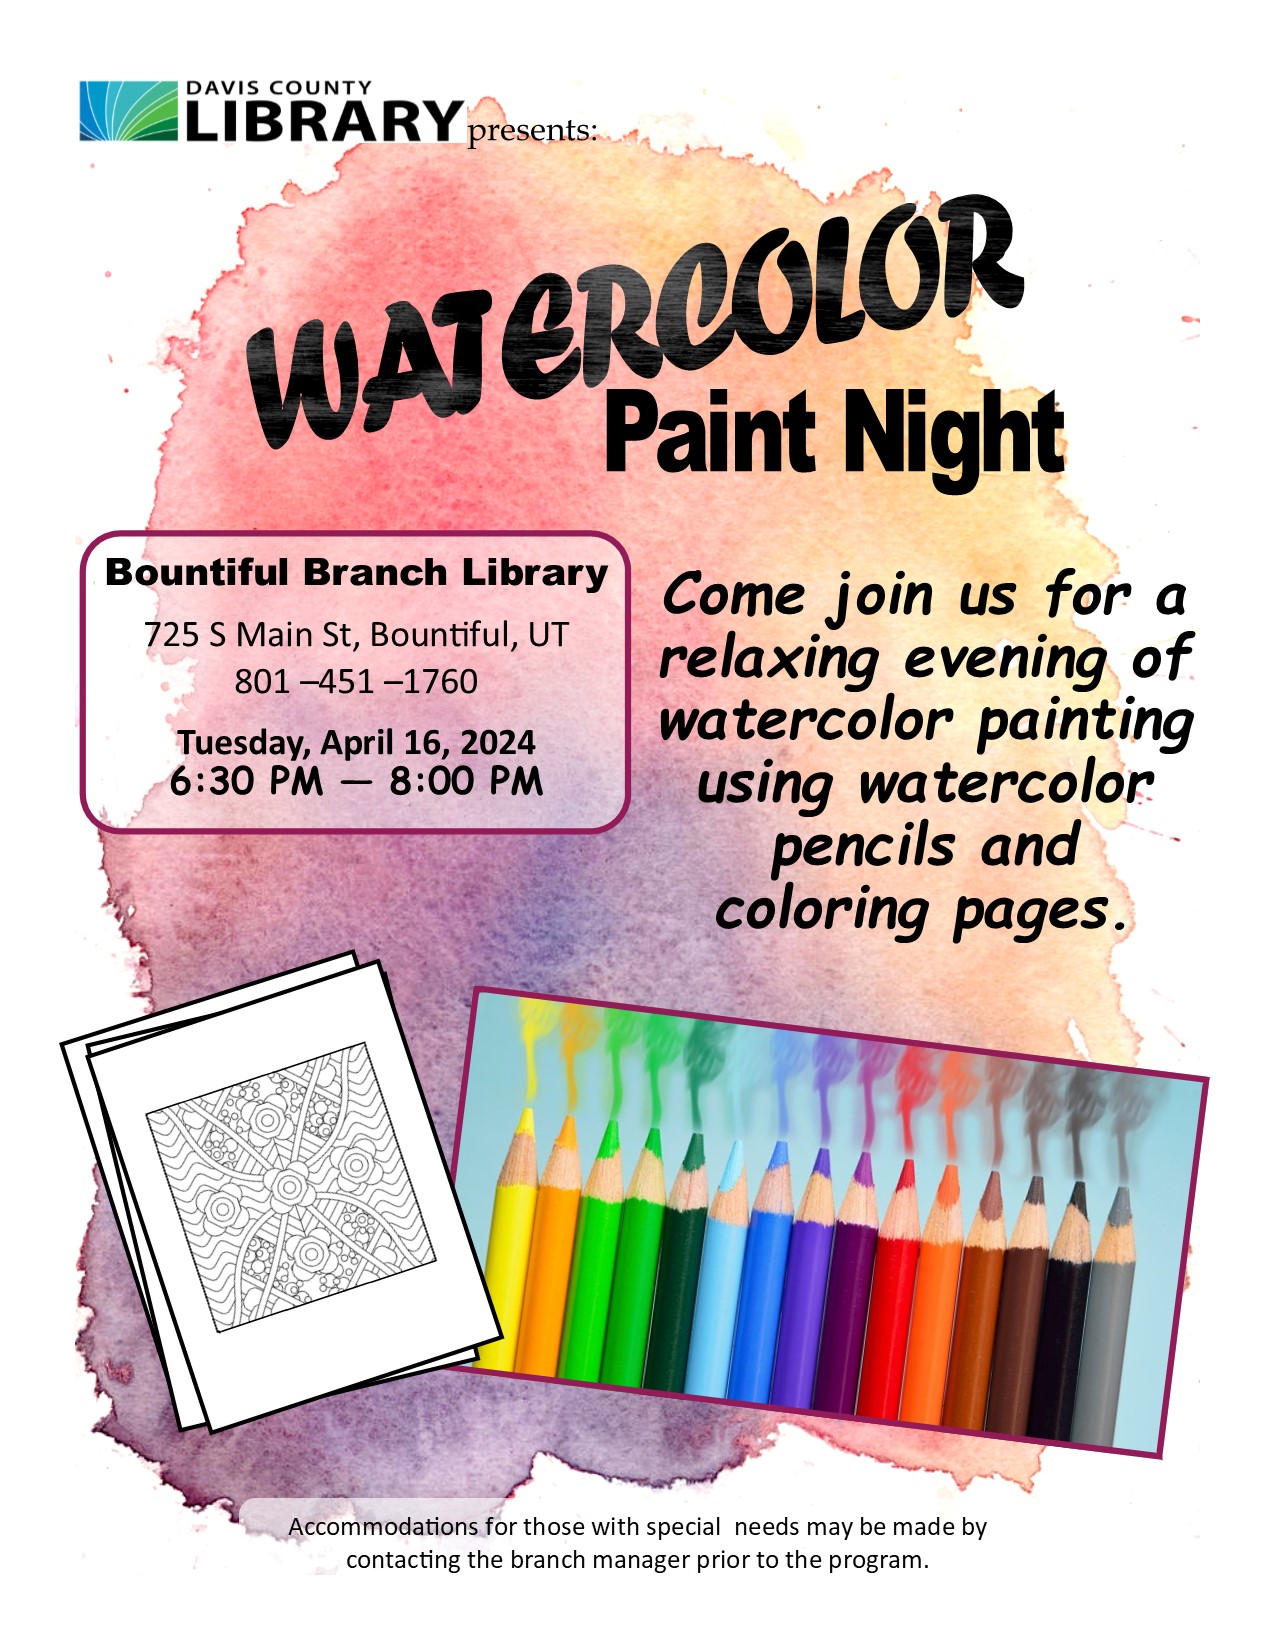 Watercolor Paint Night at the Bountiful Library (725 S Main). April 16 6:30-7:30 pm.